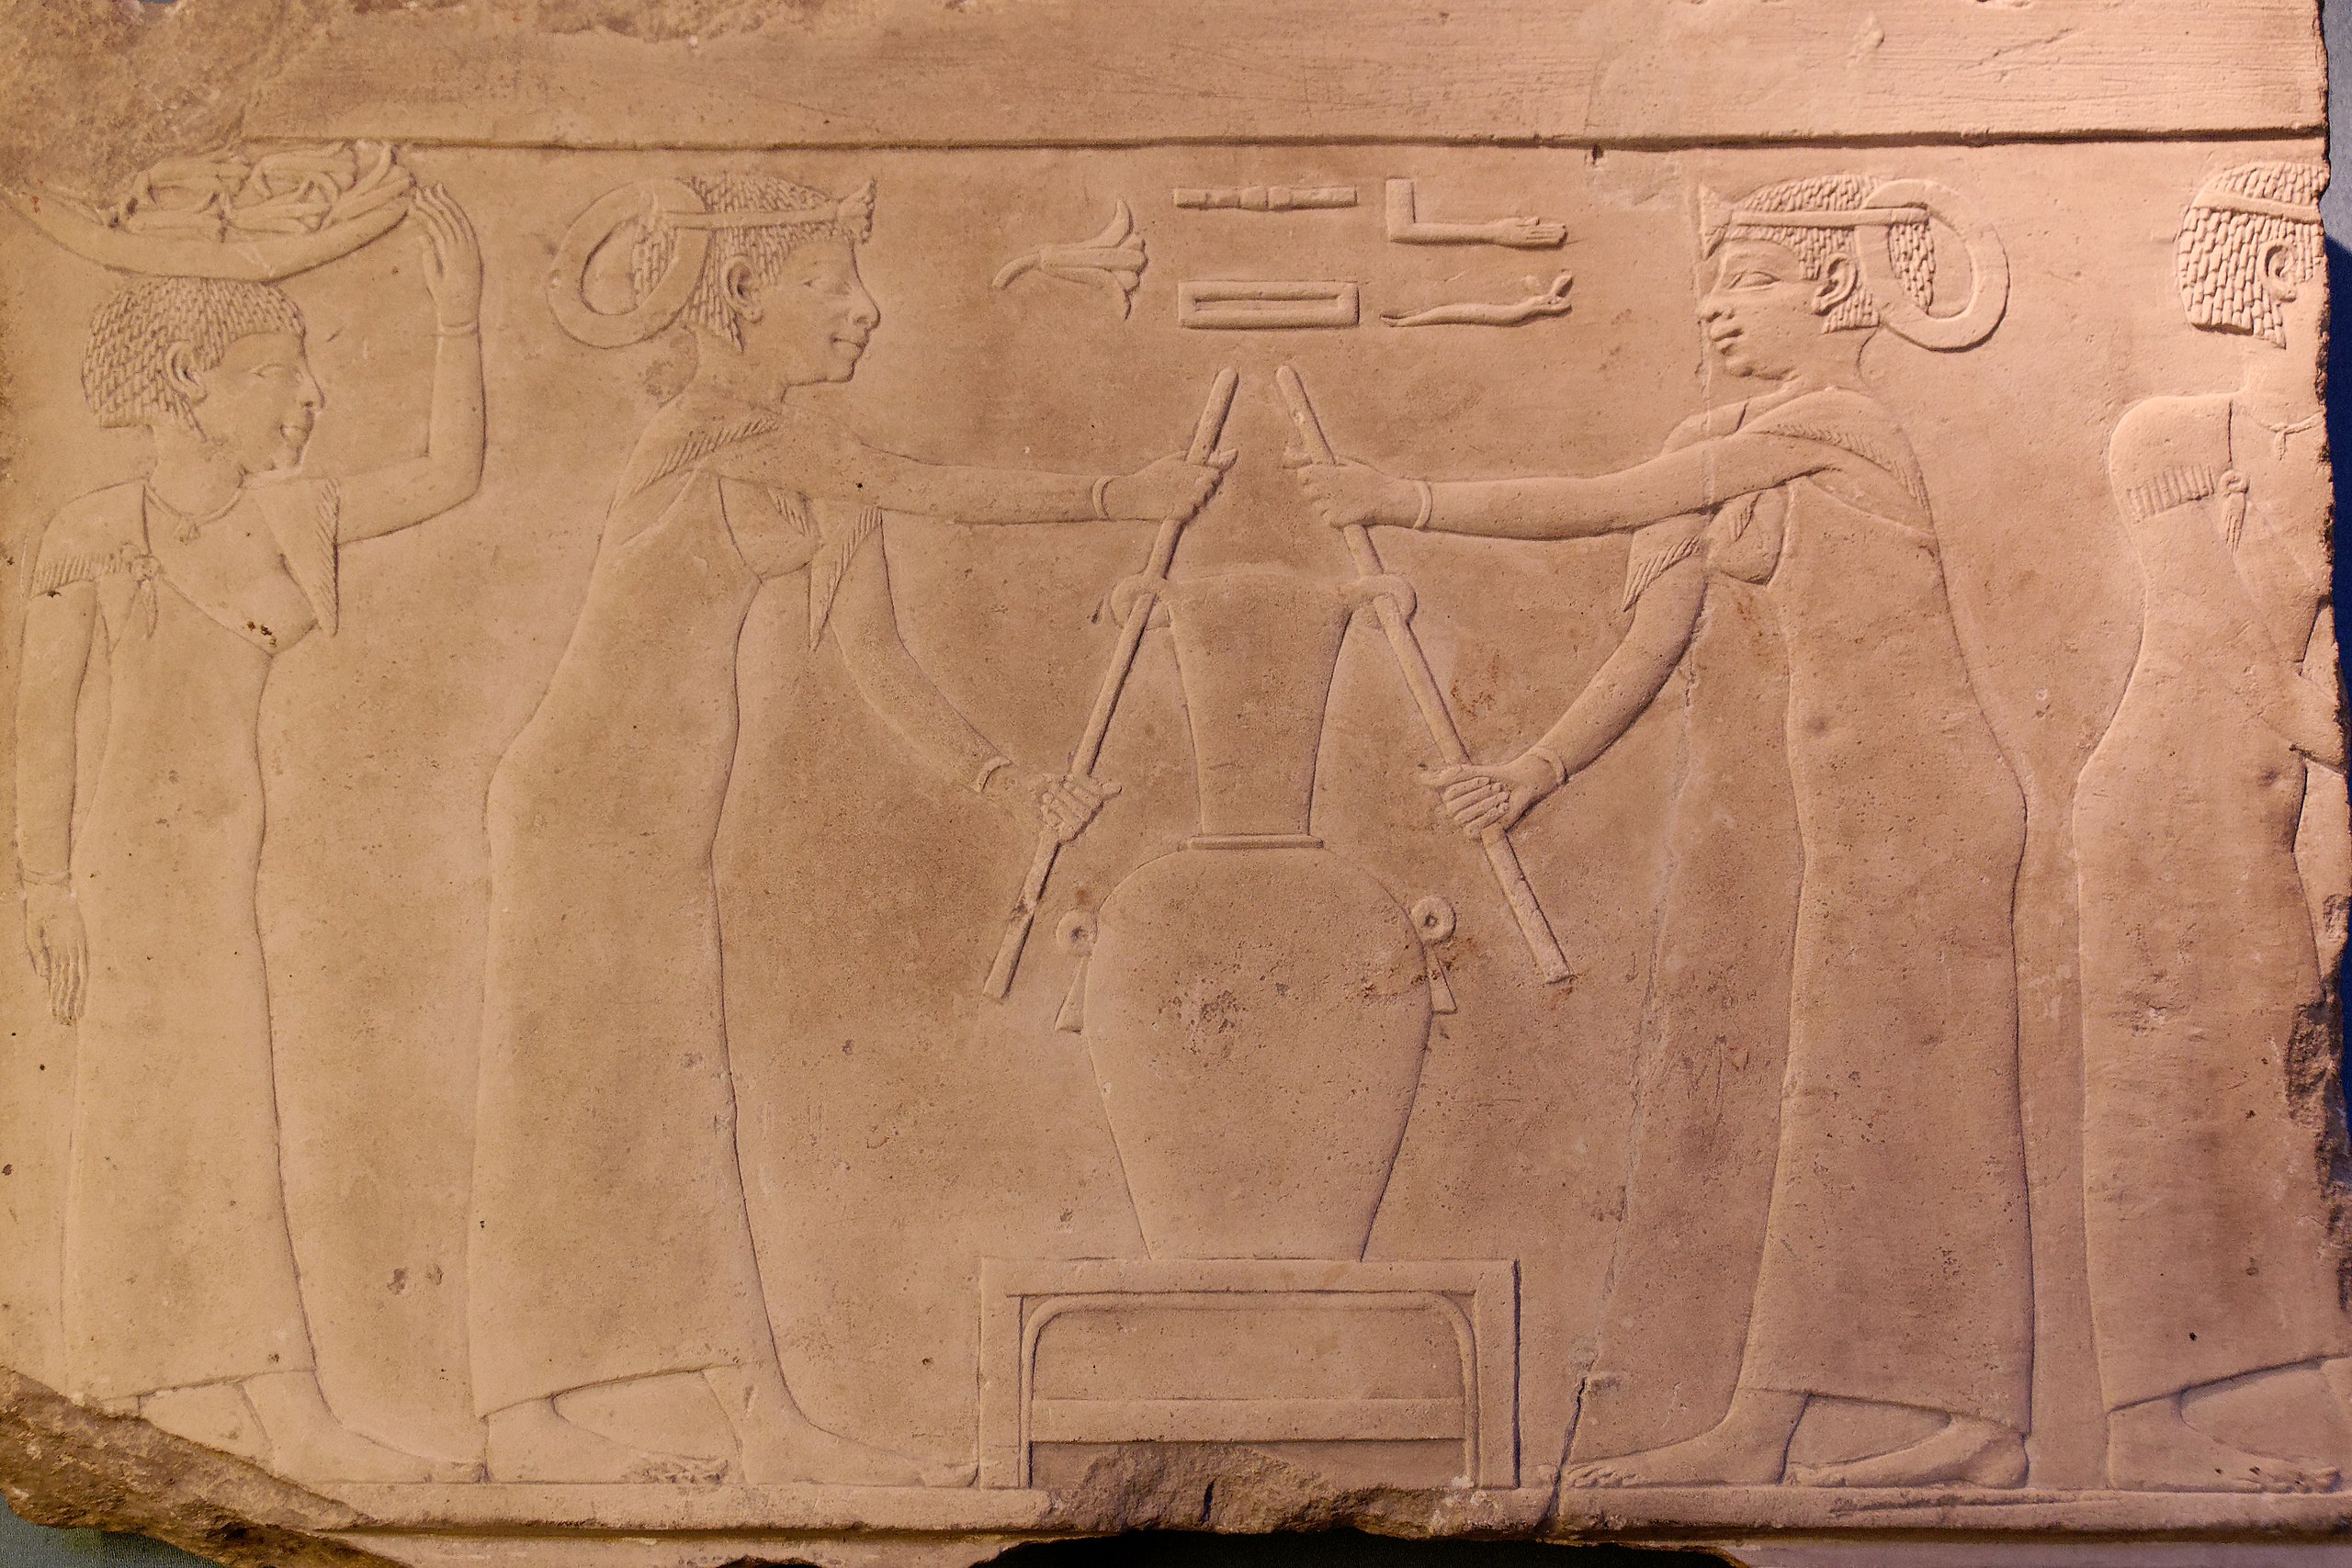 A relief showing the Egyptian perfume-making process